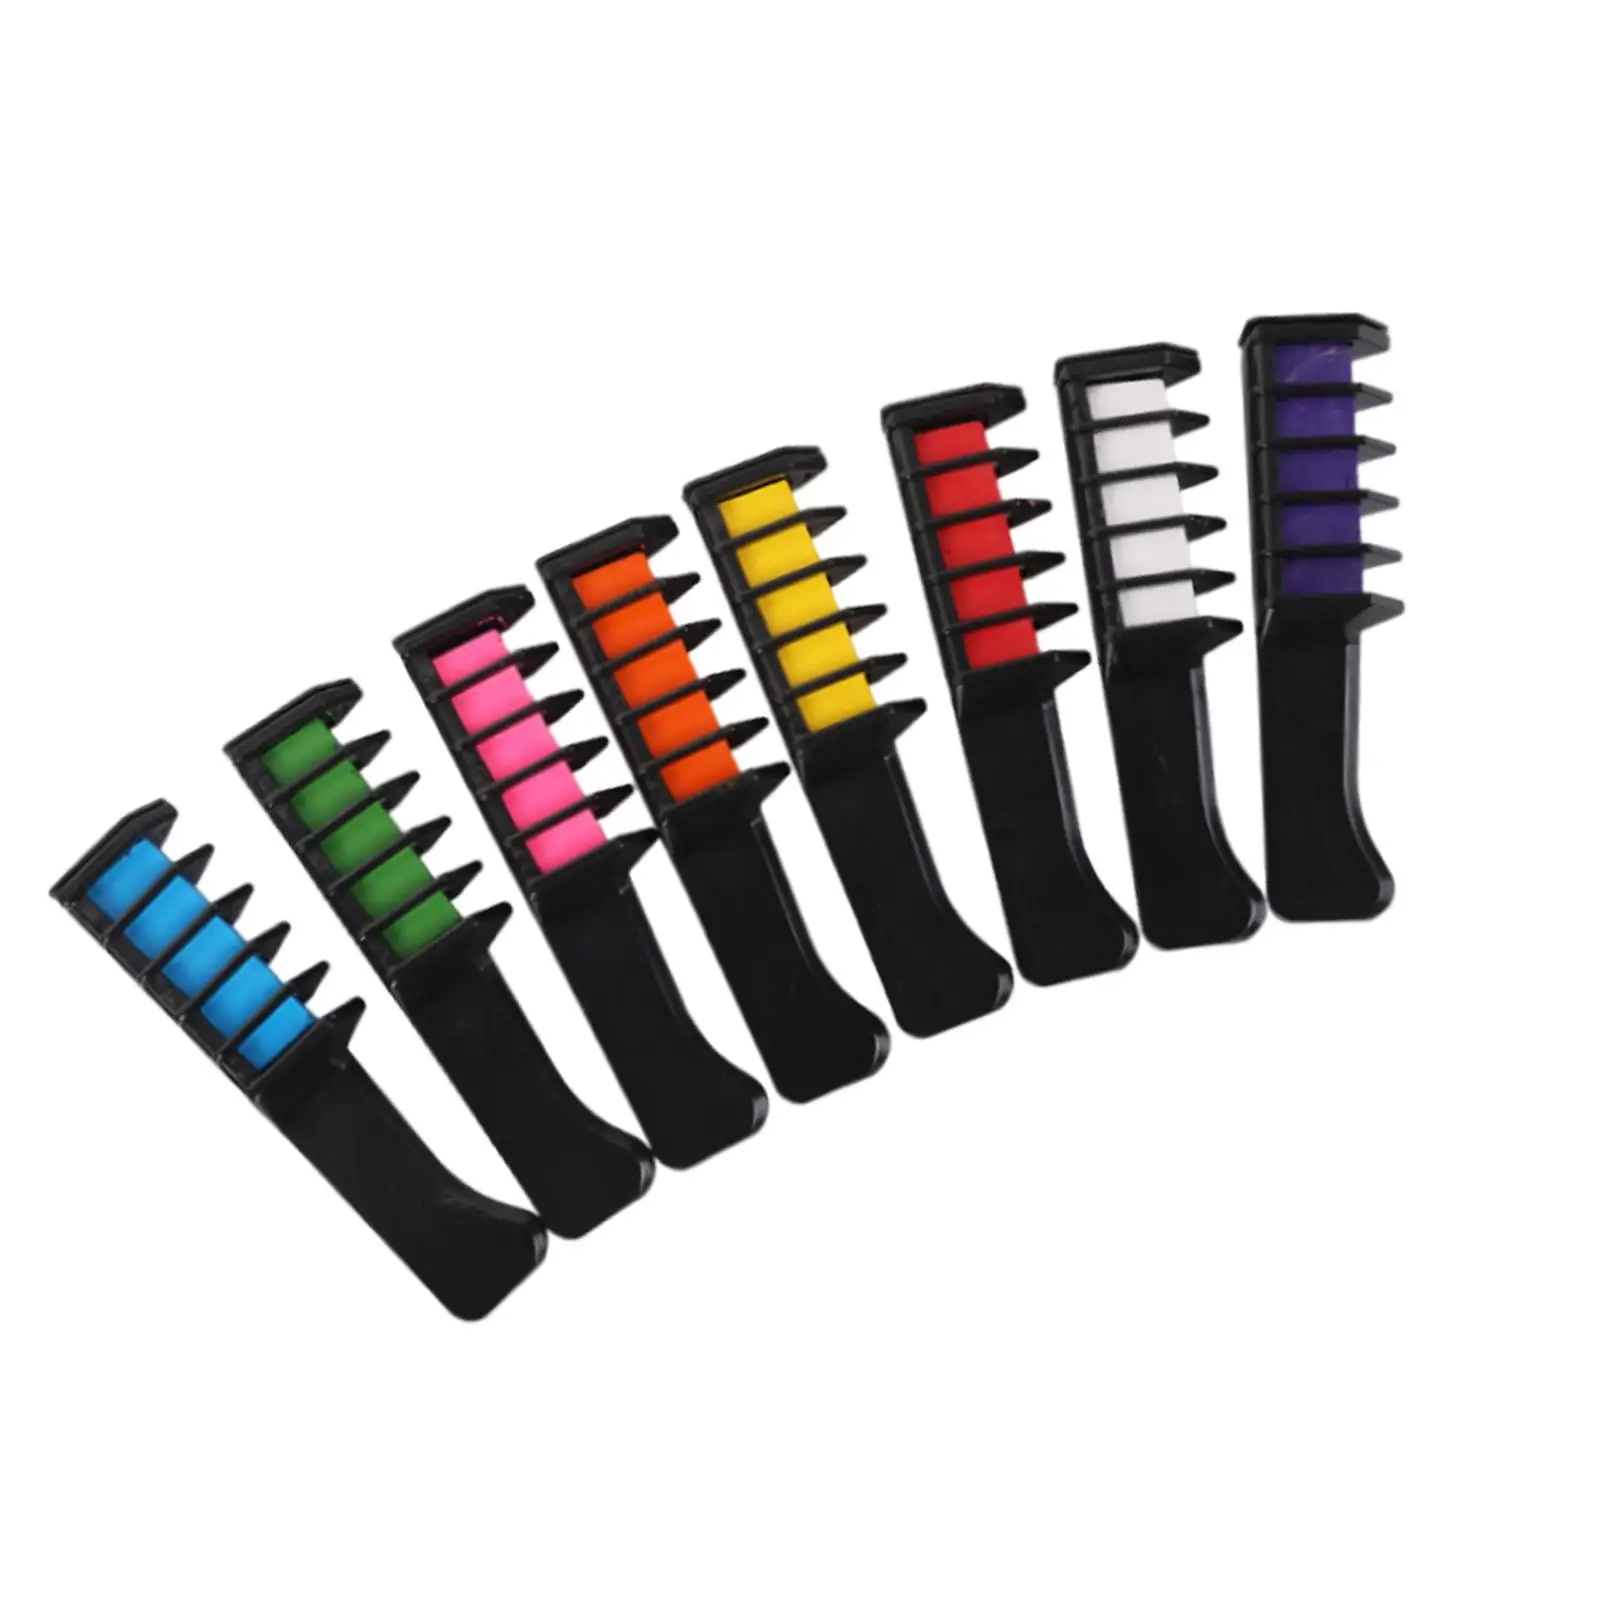 12x Disposable Dyeing Combs DIY Multicolor Easy to Clean Washable Hair Color Comb for Dress up Costume Cosplay Makeup Halloween